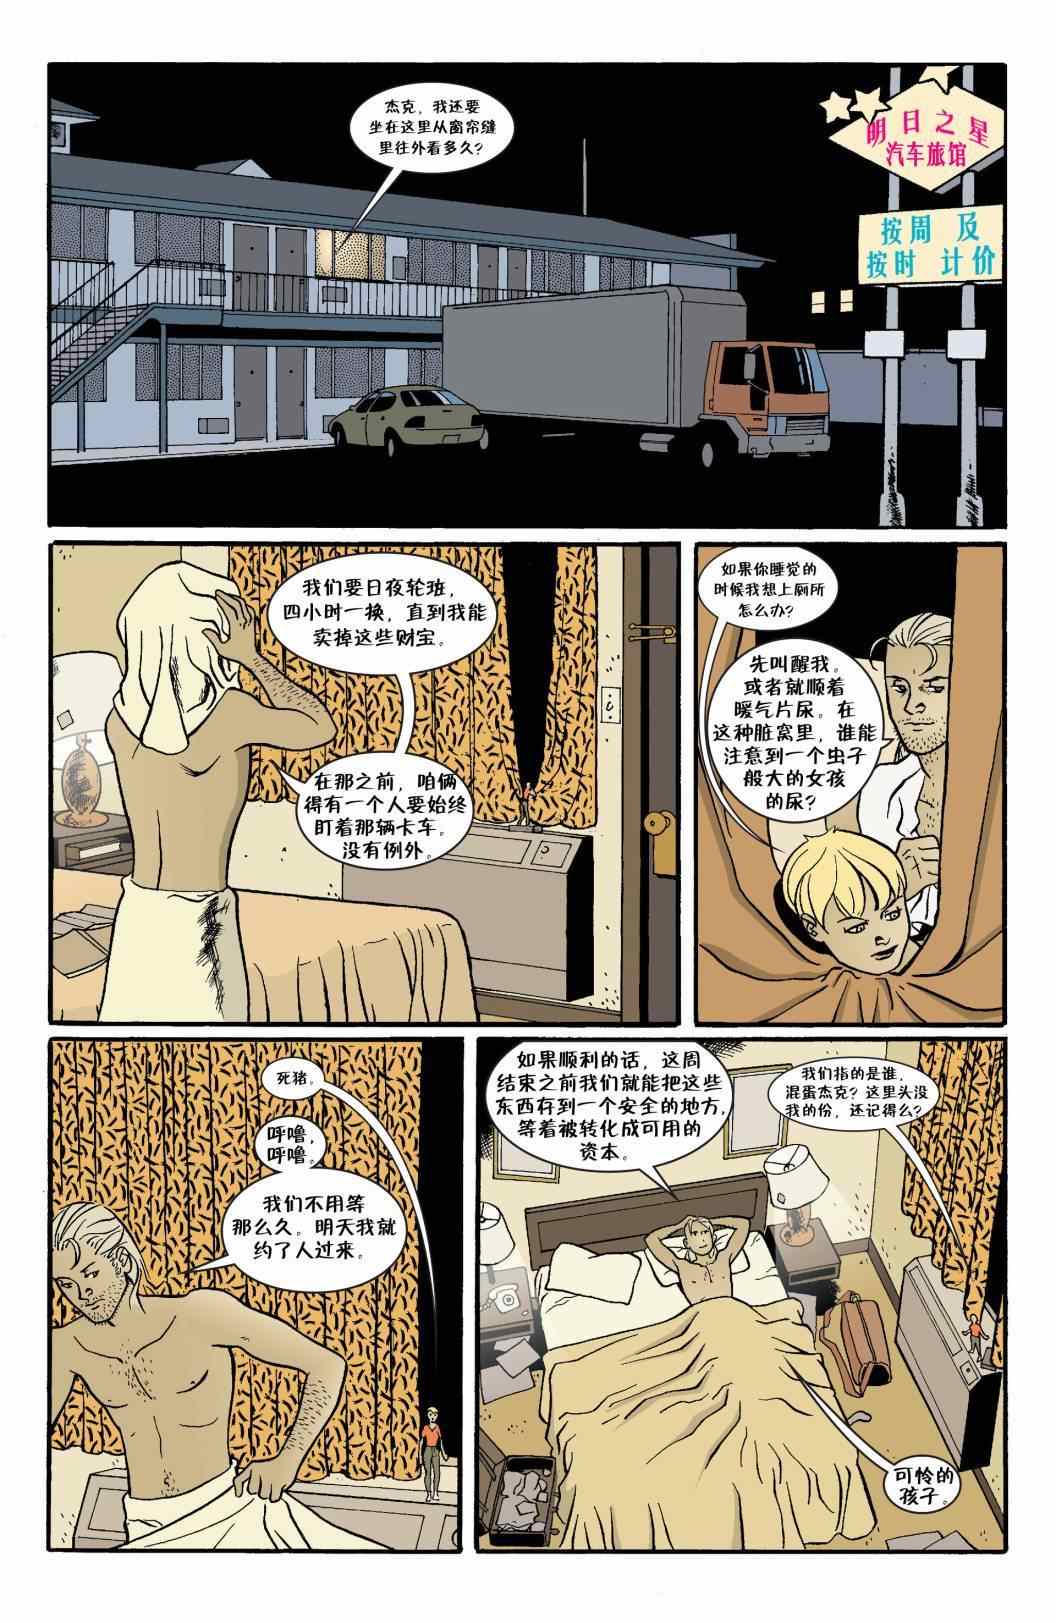 《Fables》漫画 034卷